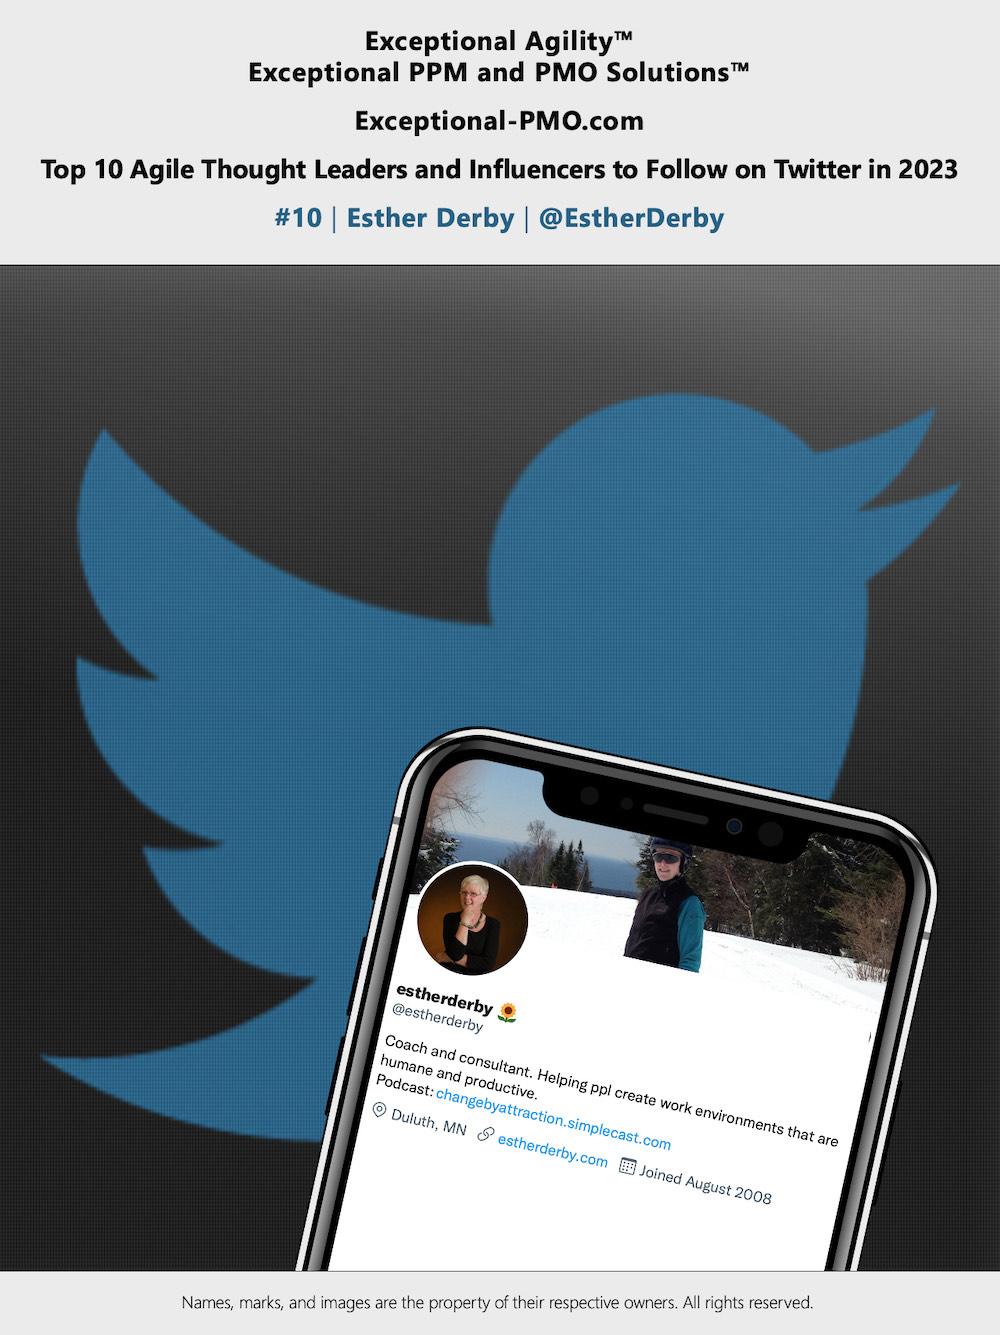 Exceptional-PMO_com - Top 10 Agile Thought Leaders and Influencers to Follow on Twitter in 2023 - 10 - lr - sq